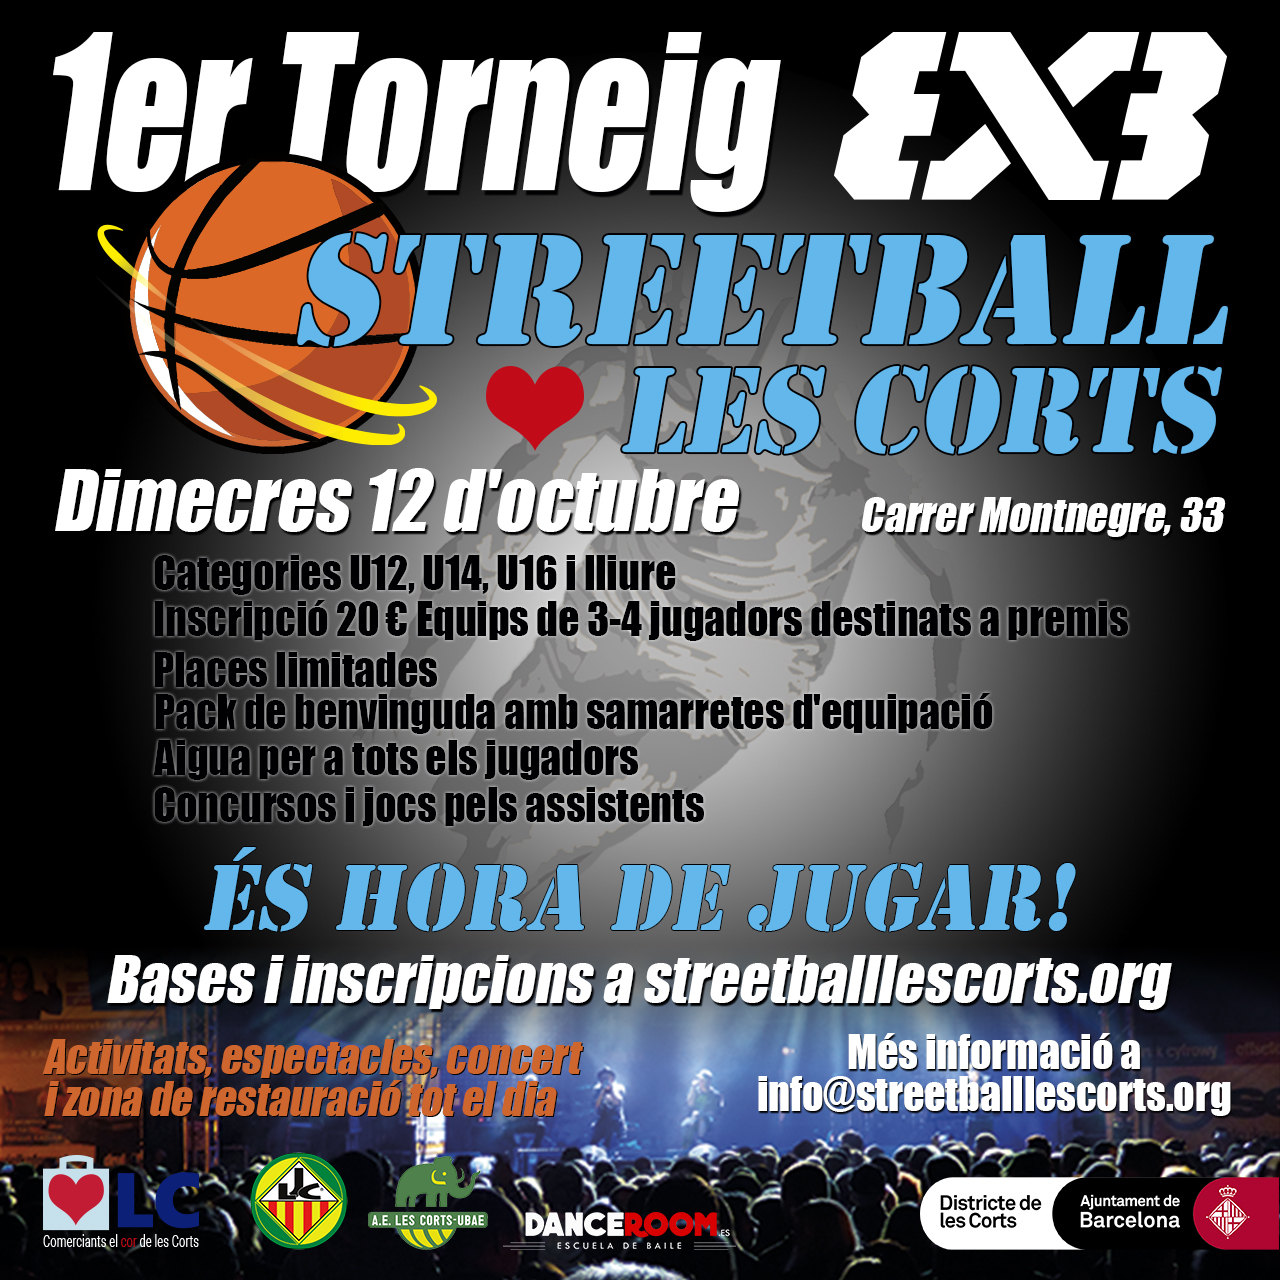 1er Torneo 3x3 Streetball ♥ les Corts